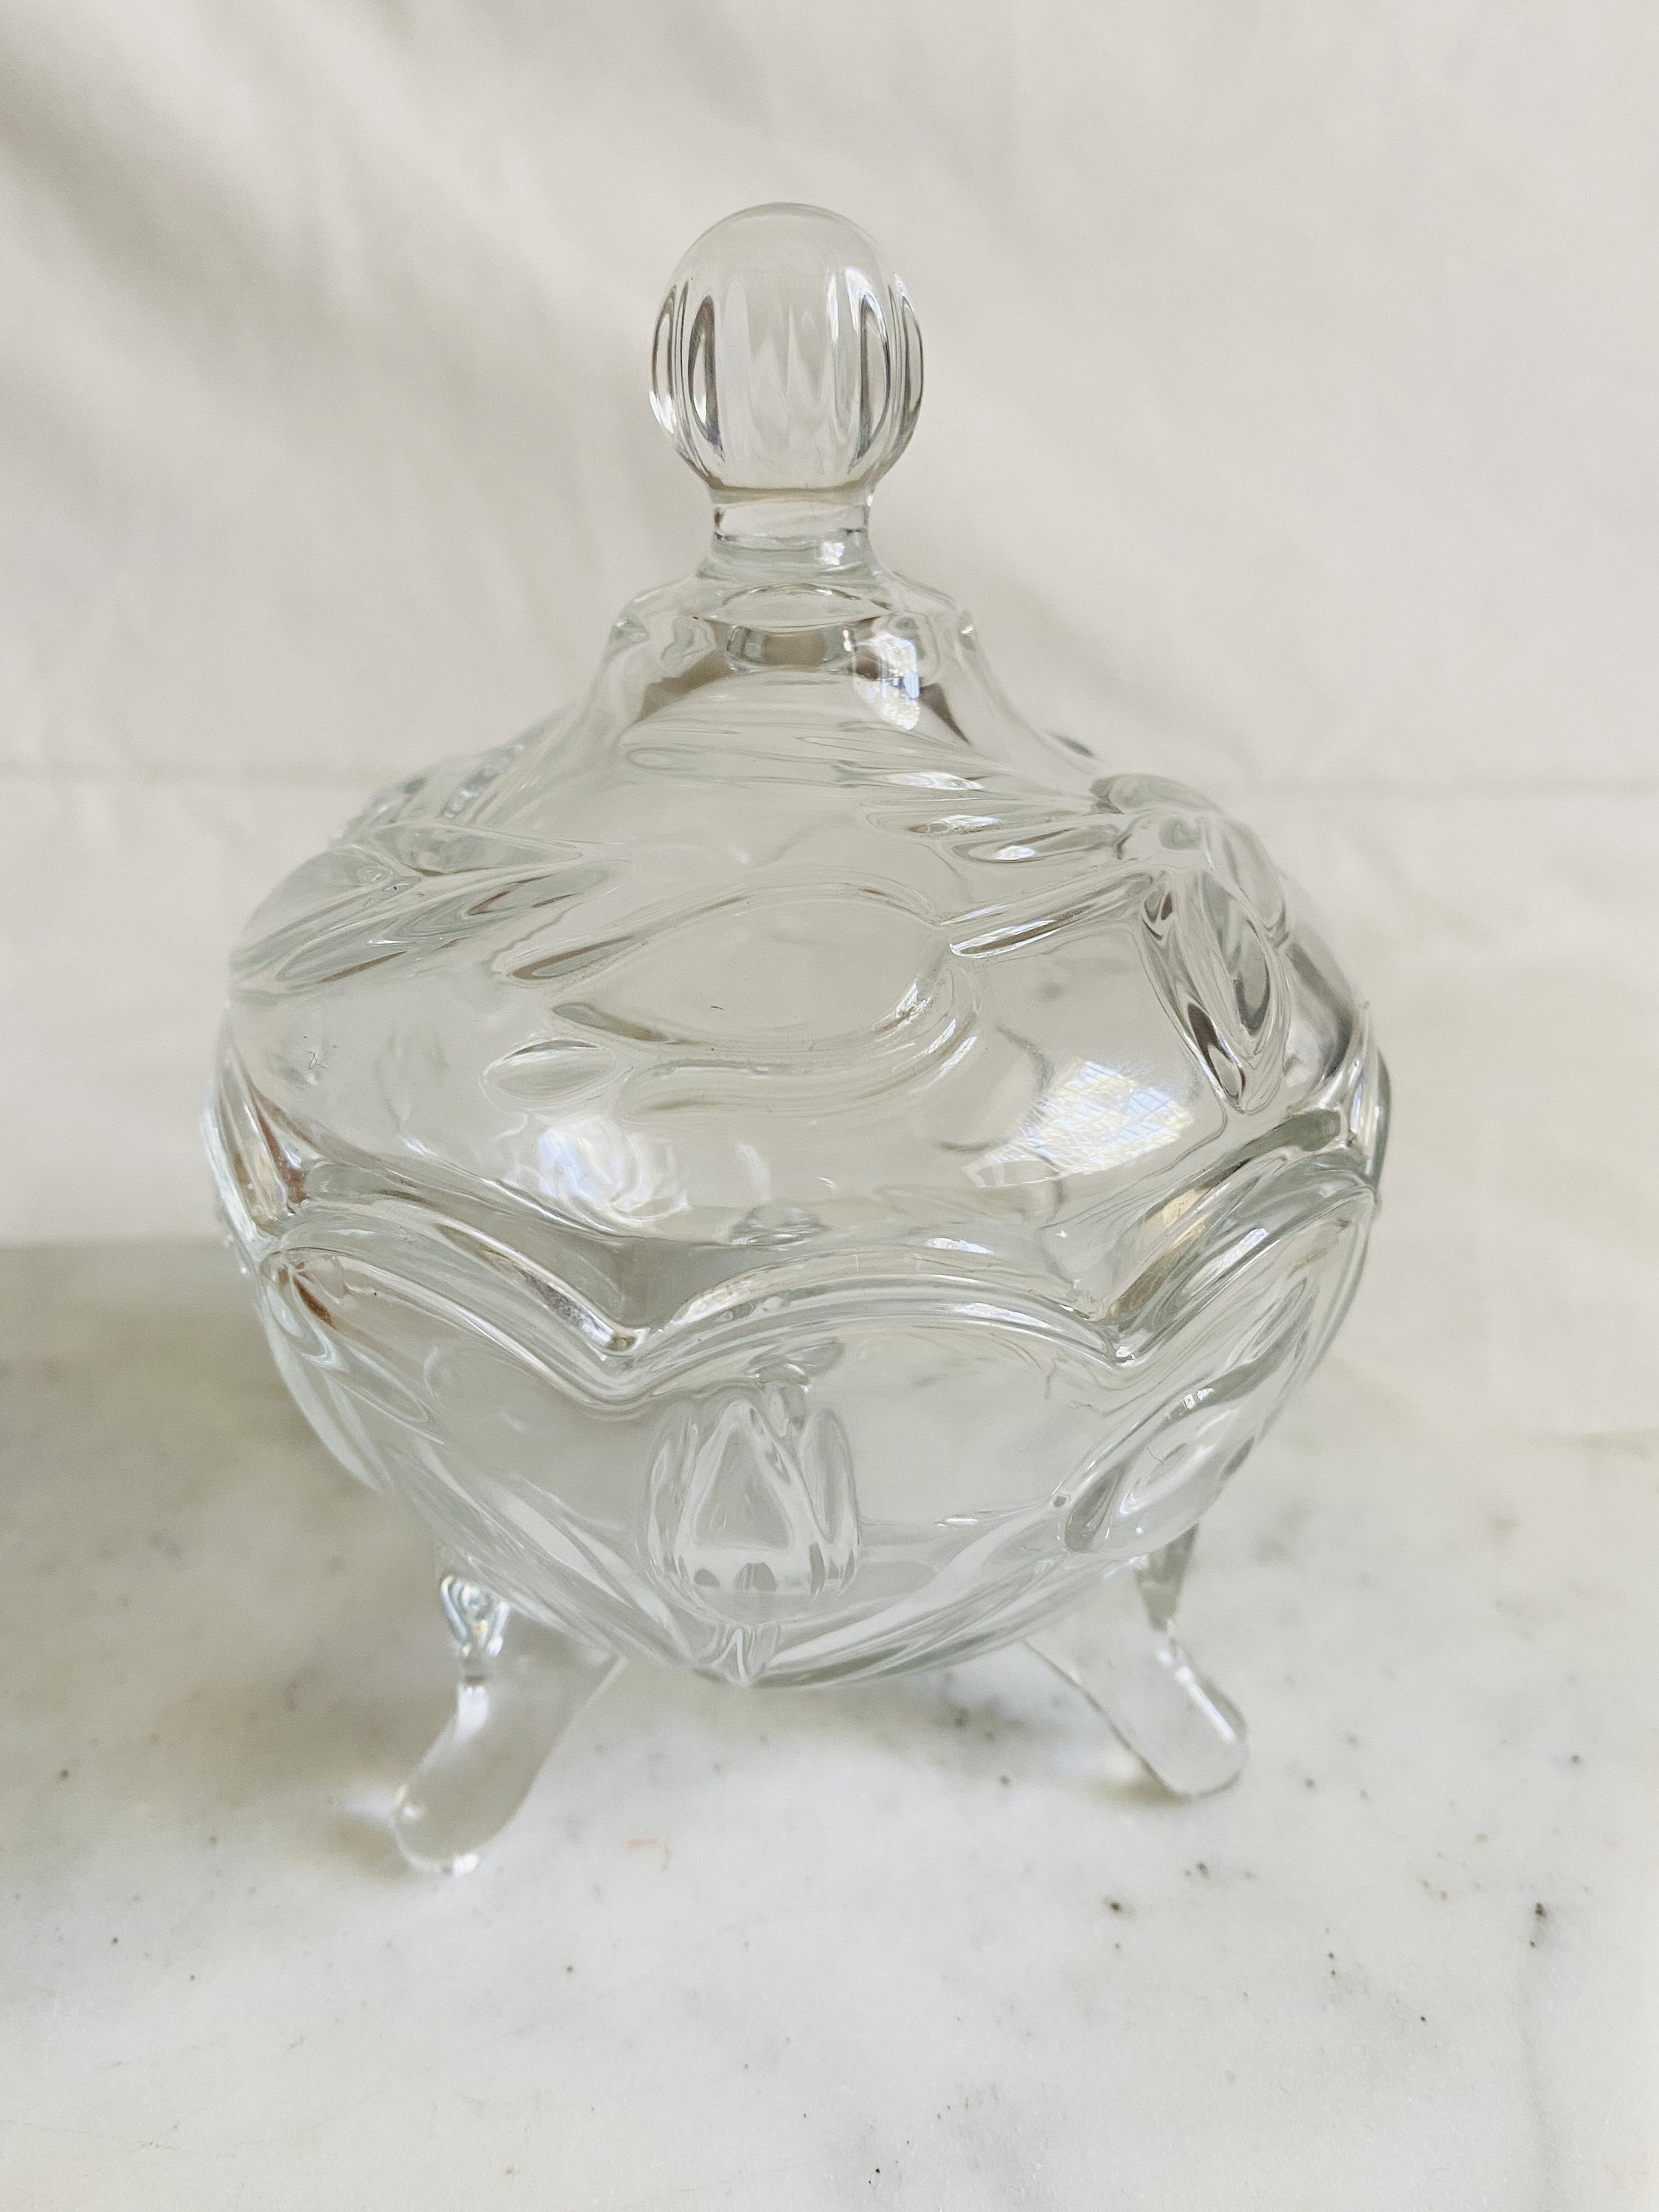 Glass Footed Tulip Etched Candy Dish Royalcore Cottagecore Lidded Candy Dish Dark Academia Trinket Box Royaltycore Tulip Jewelry Box